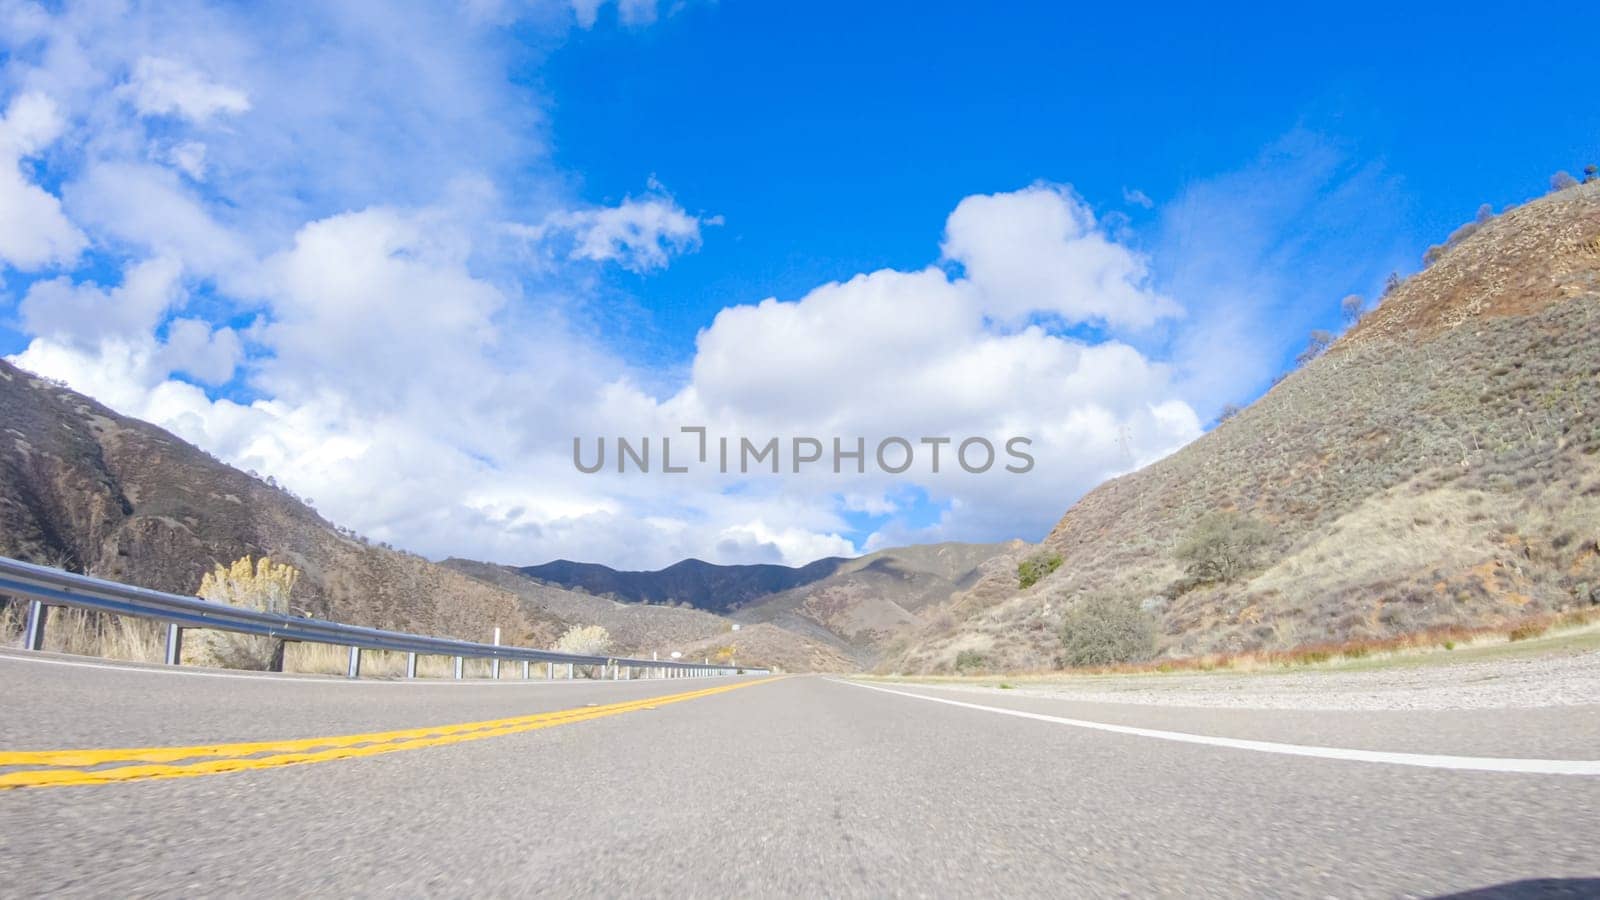 Driving Under Sunny Skies on Cuyama Highway Scenery by arinahabich